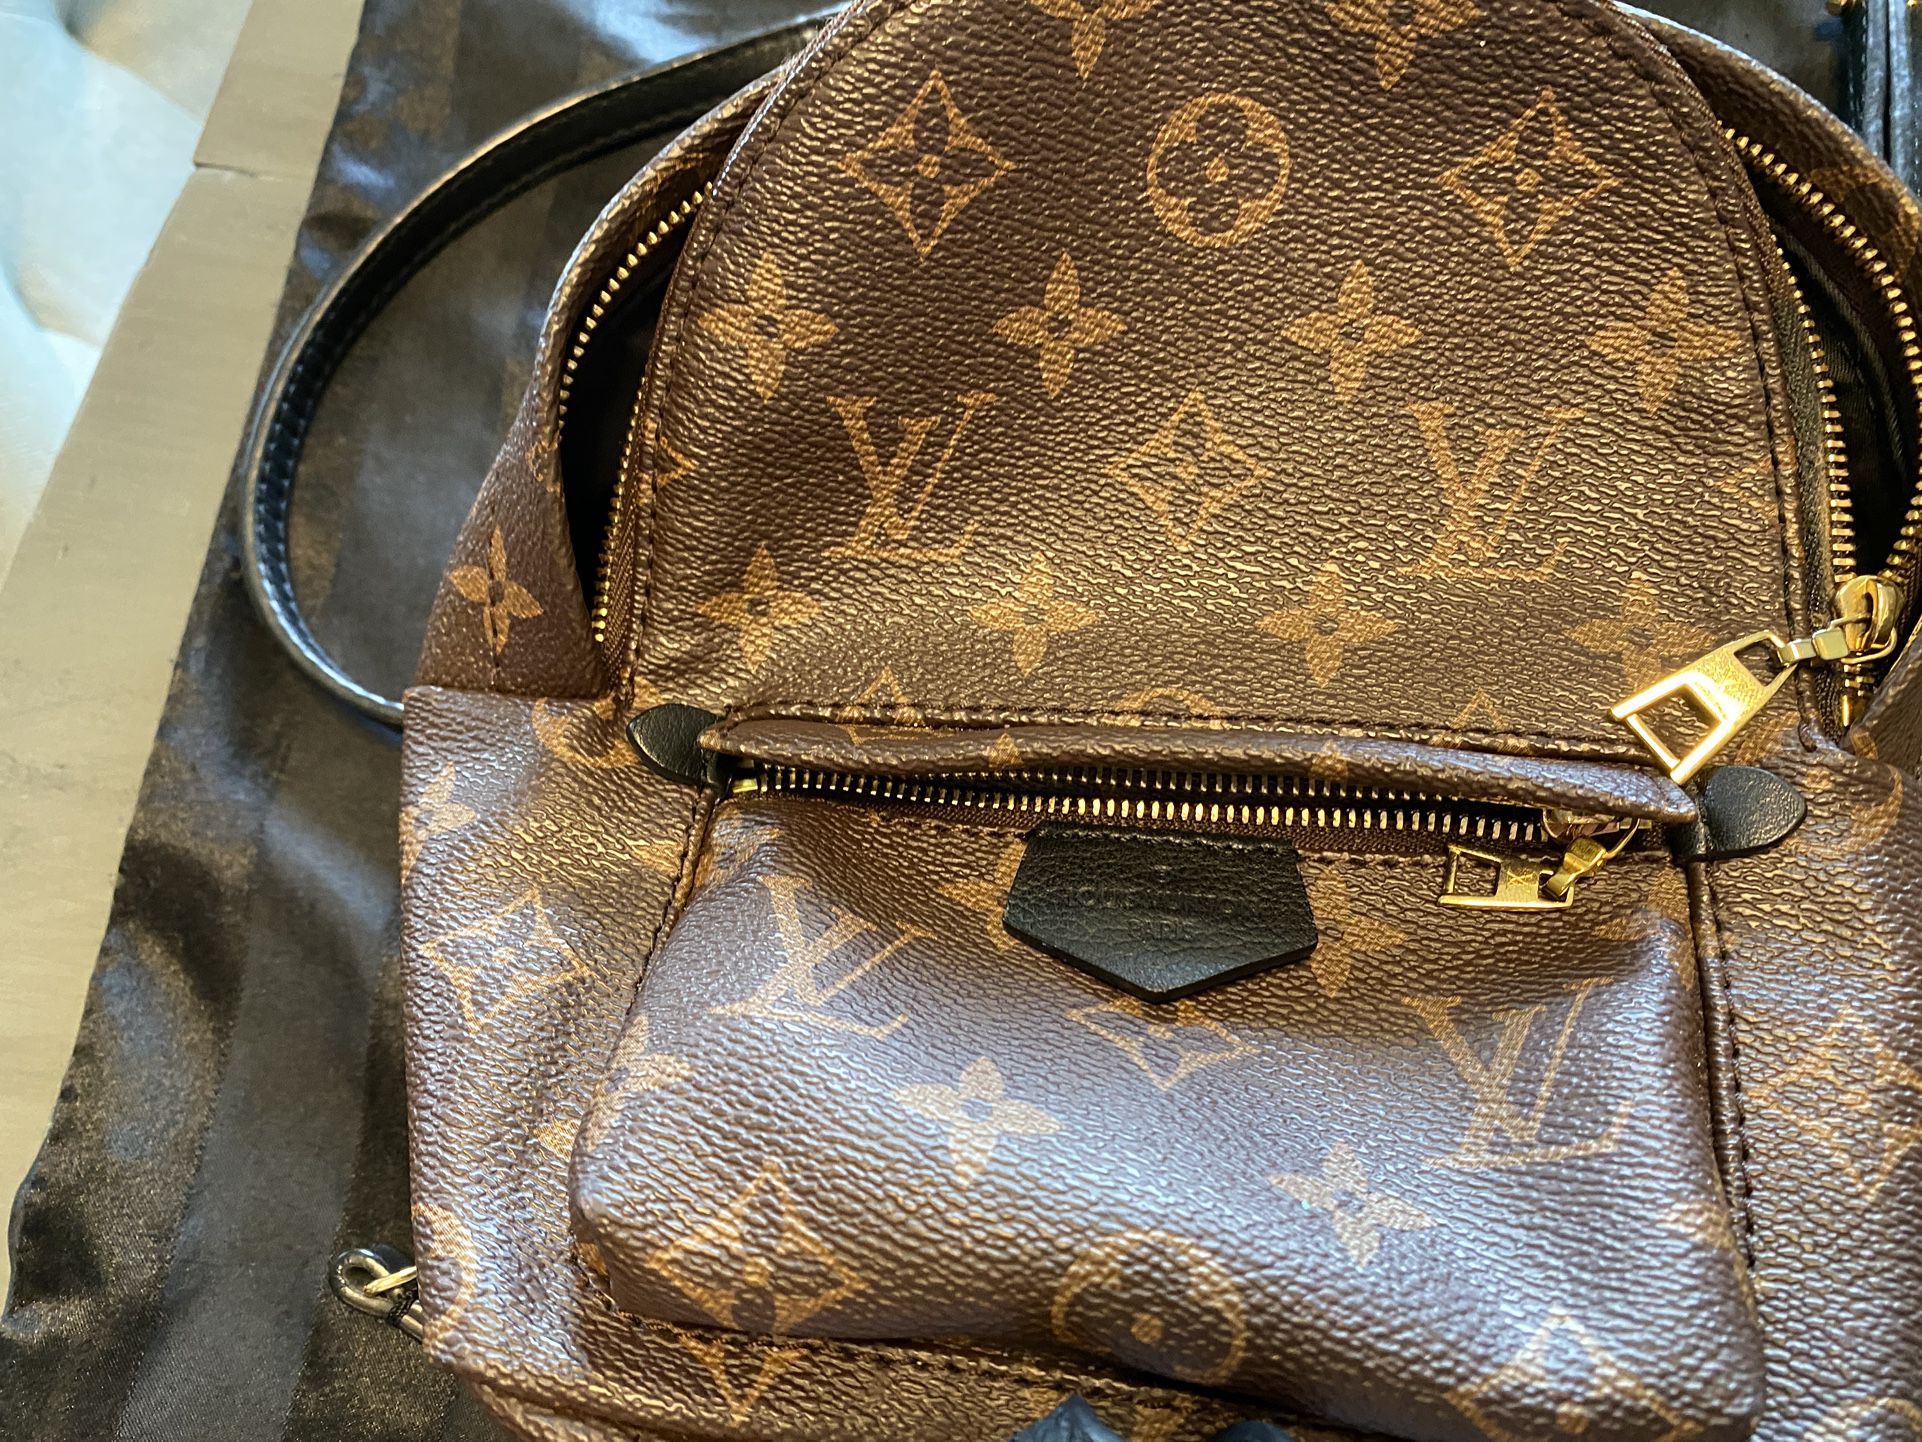 Louis Vuitton Men'sTakeoff Backpack Black for Sale in Frisco, TX - OfferUp